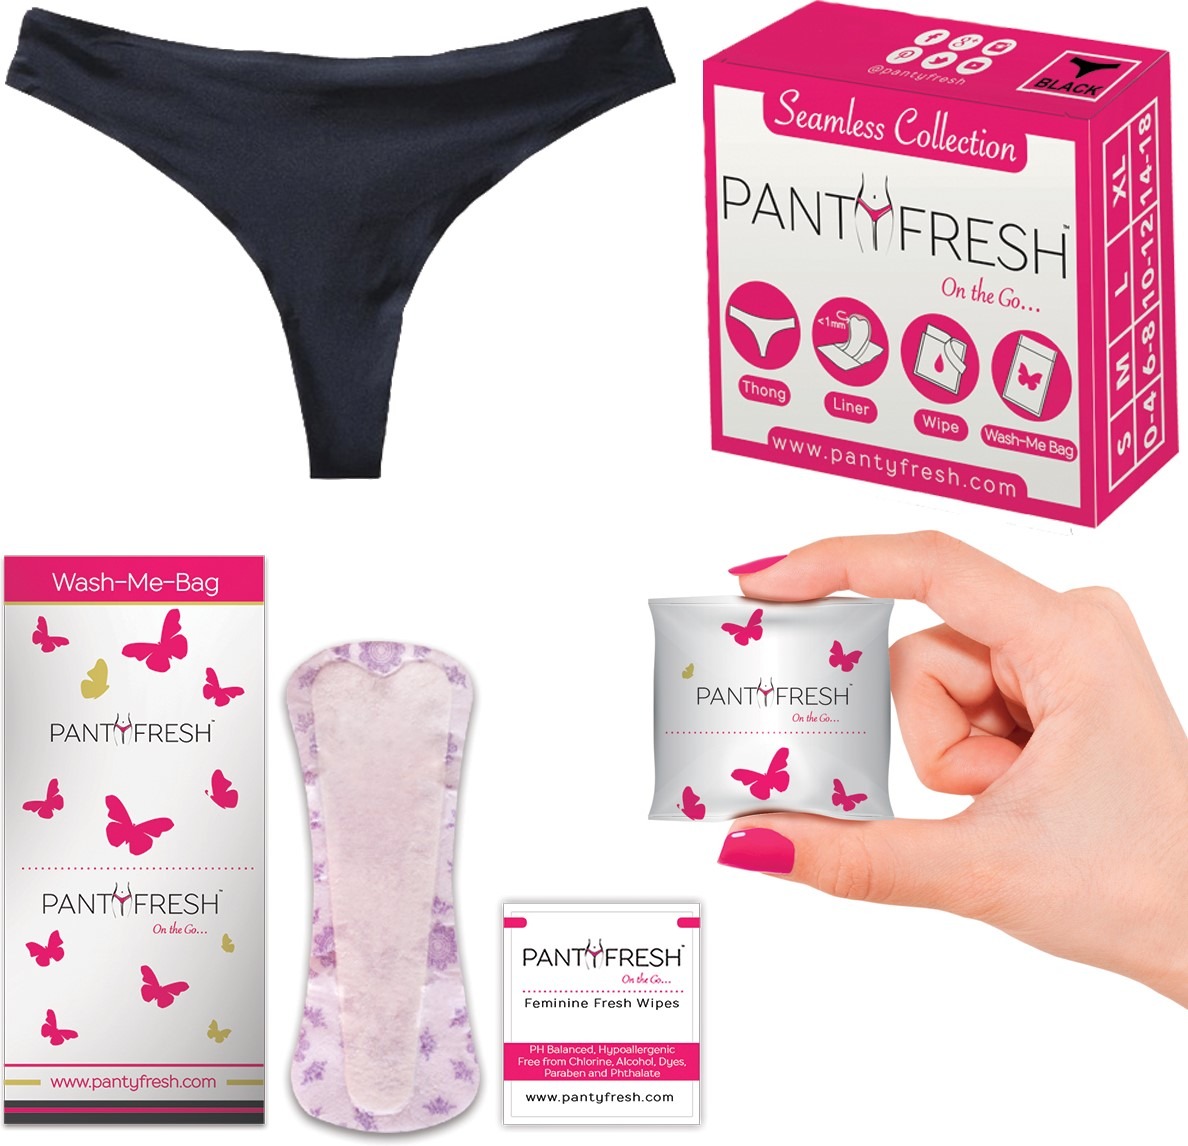 On the Go Emergency Thong Underwear kits by Panty Fresh